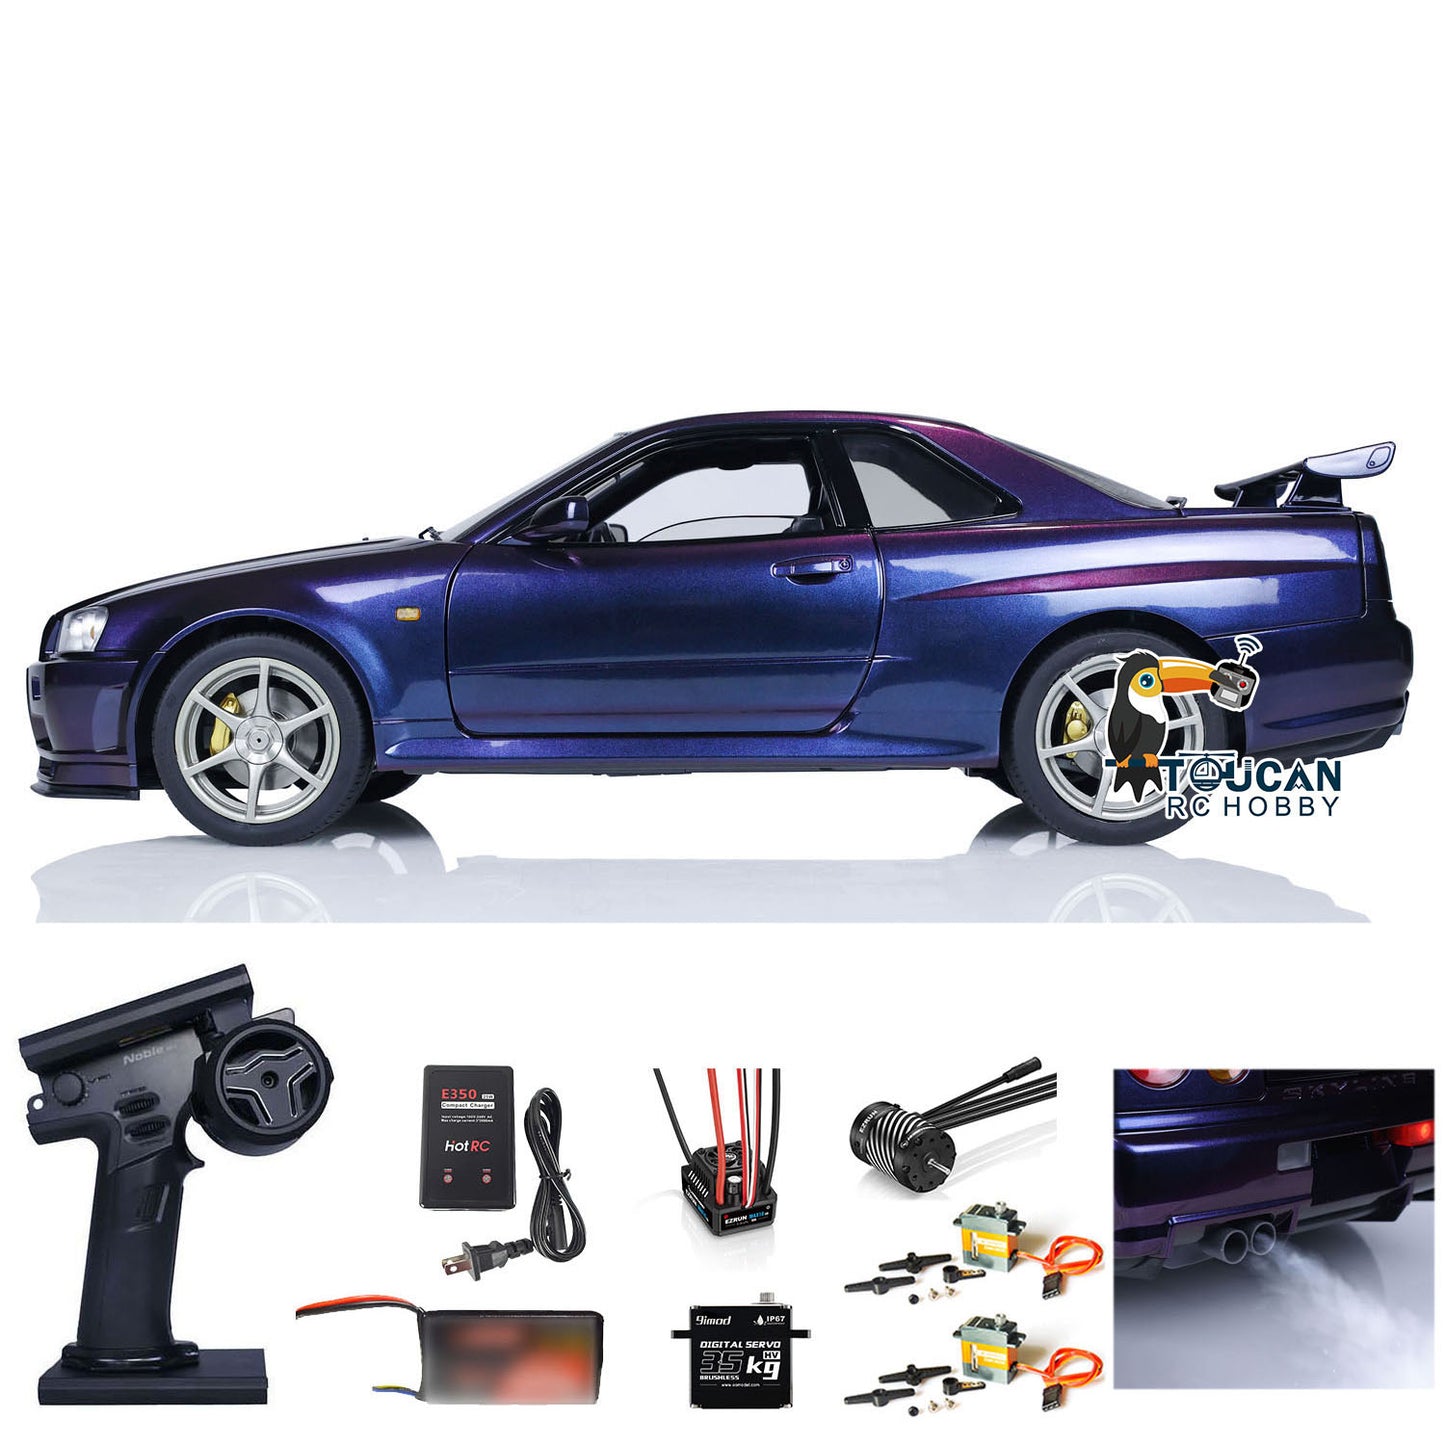 IN STOCK Capo 1/8 Metal 4x4 RC Racing Car Radio Controlled Drift Vehicle Model 4WD R34 RTR High-speed Light Sound GTR-R34